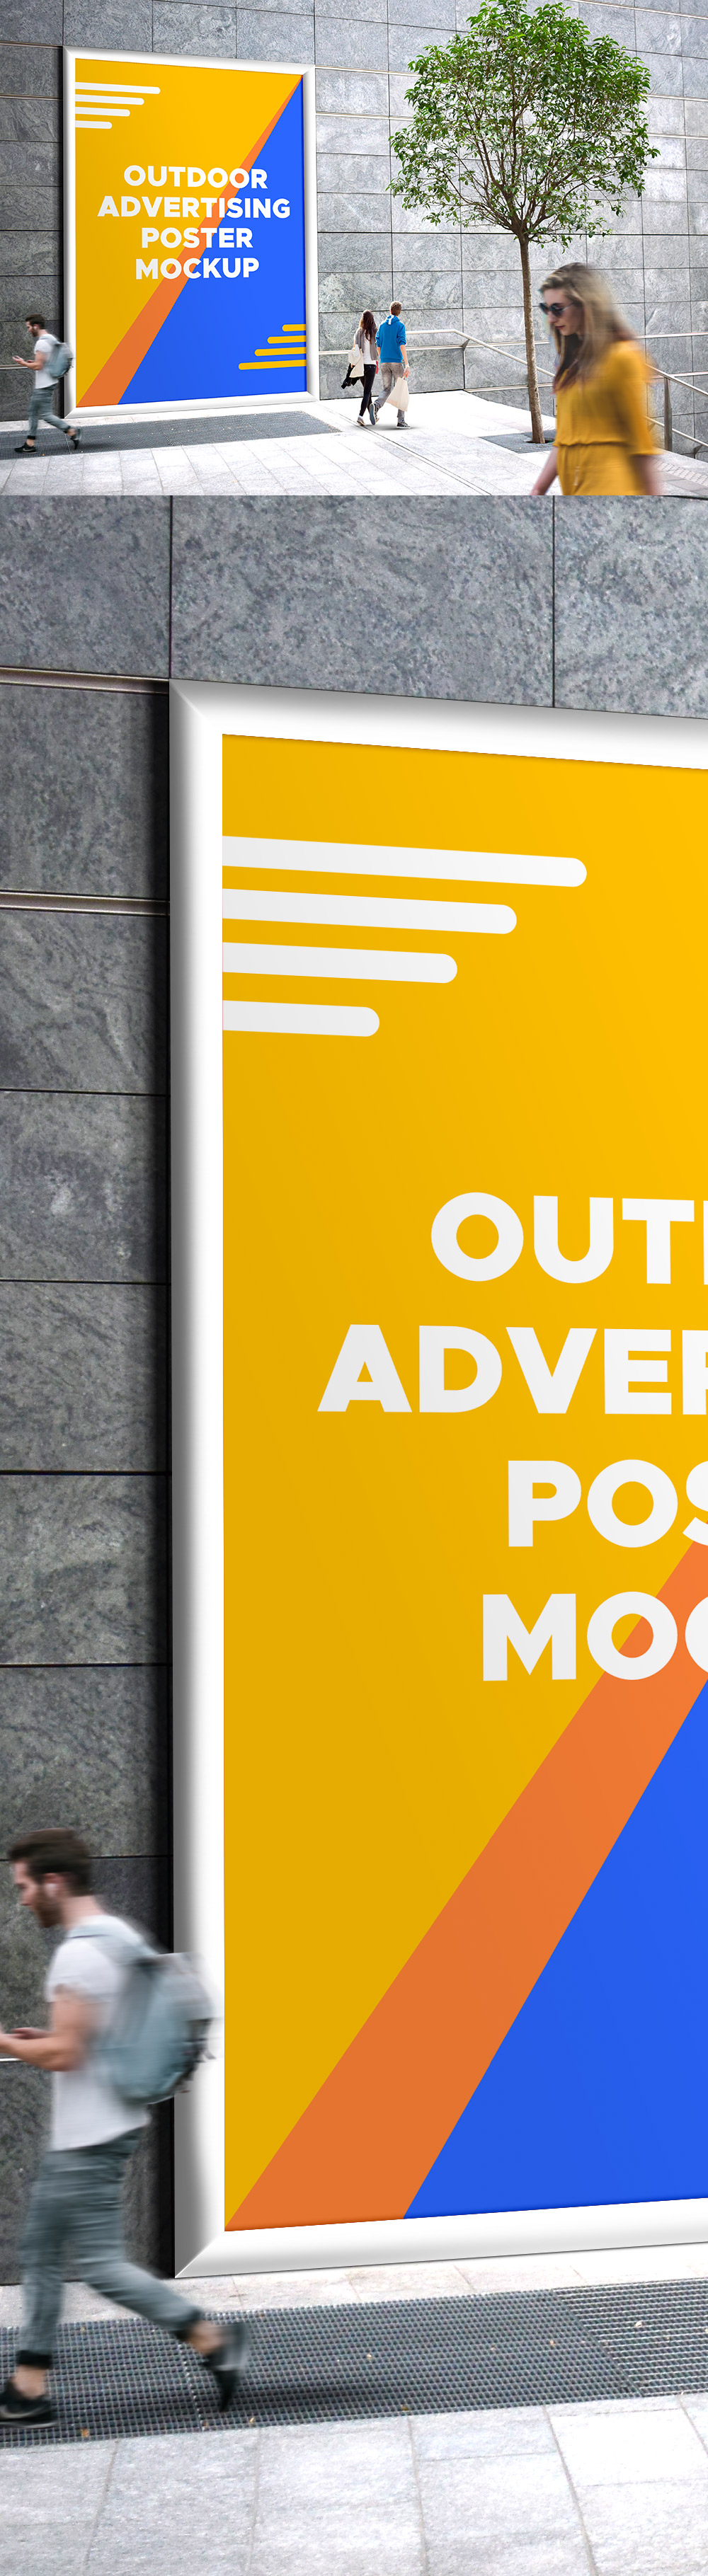 Outdoor Advertising Poster Mockup PSD - GraphicsFuel